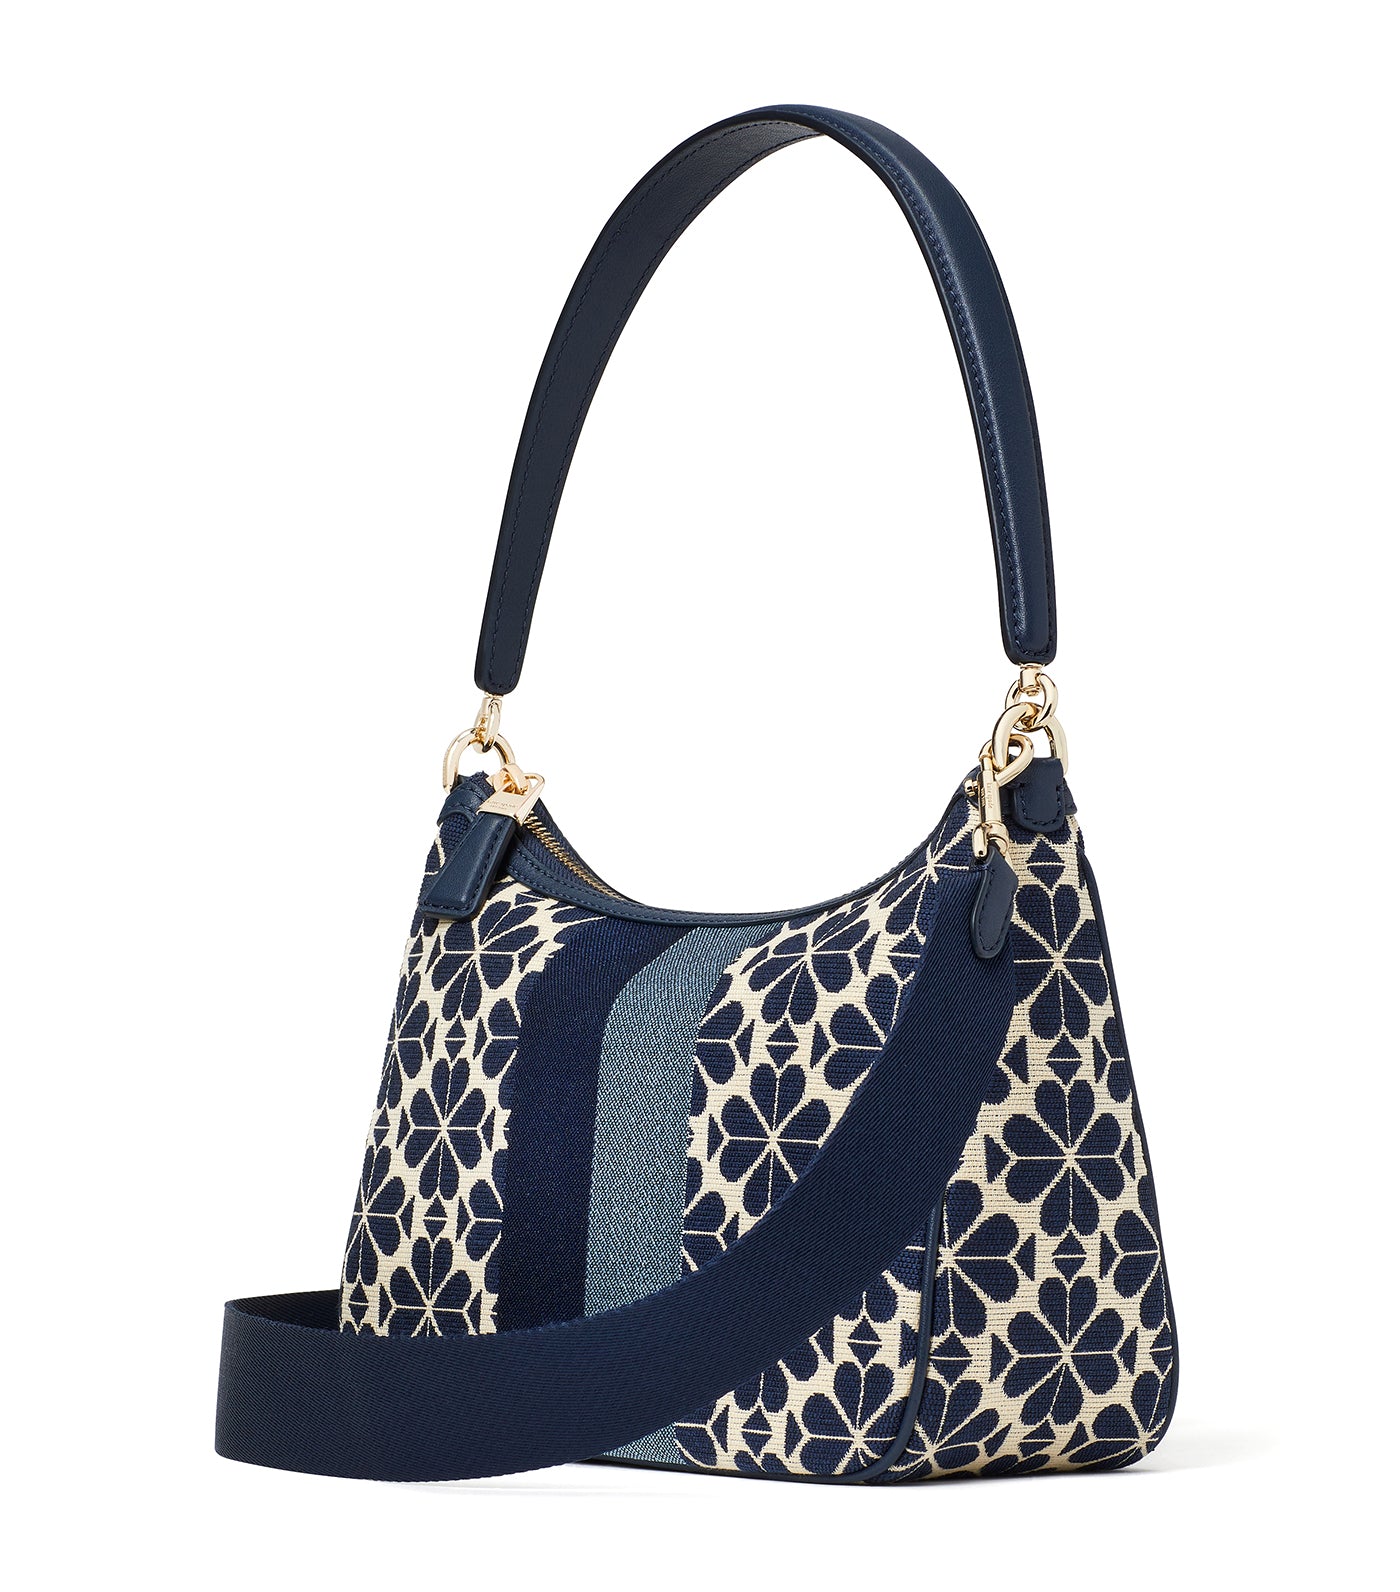 kate spade new york Zigzag Woven Leather Small Tote Bag, Blazer Blue